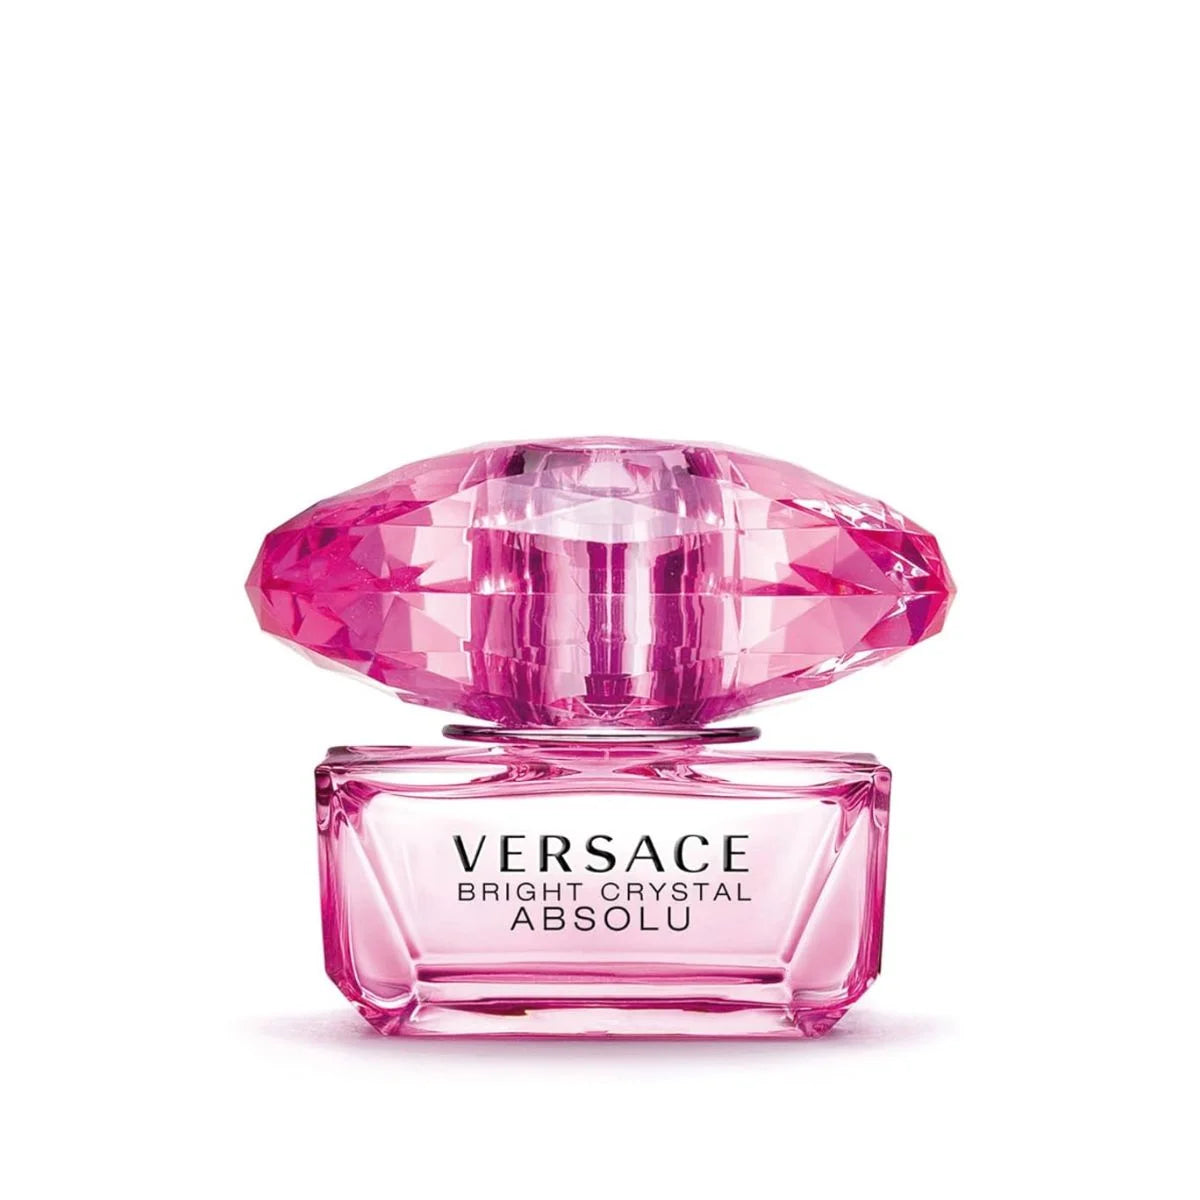 Bright Crystal Absolu by Versace for Women - EDP Spray